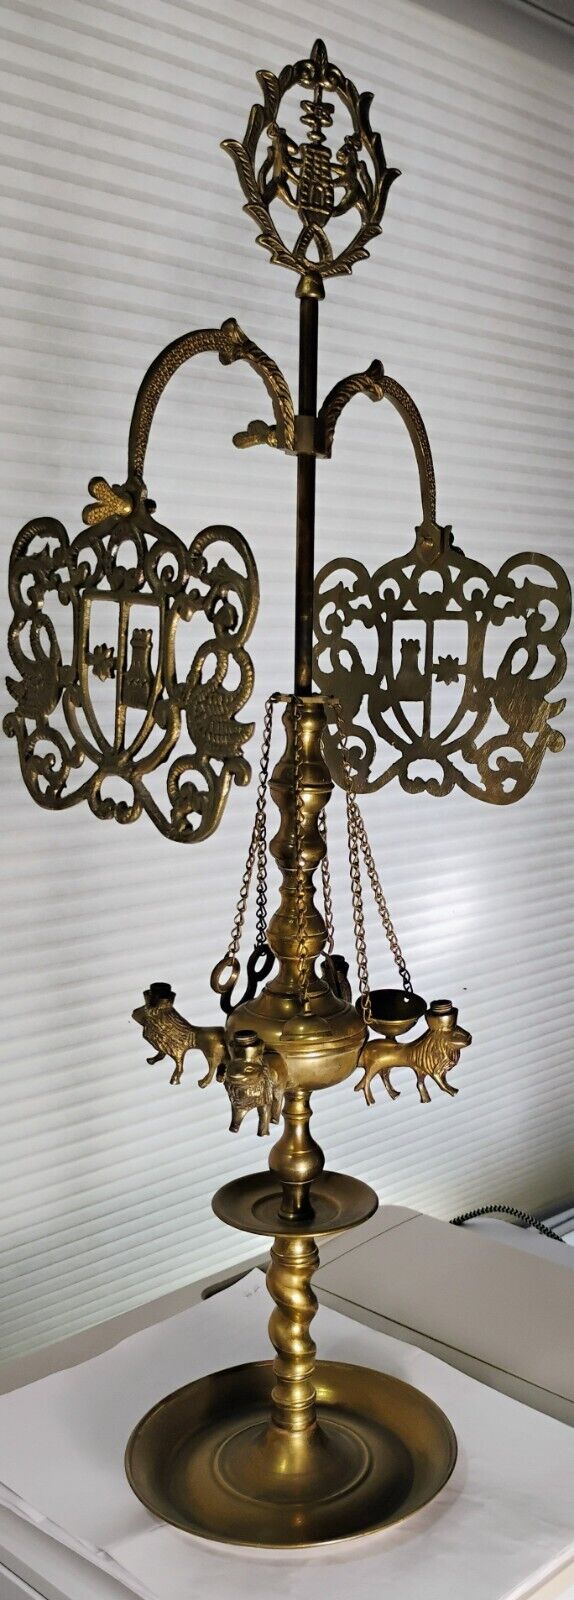 ANTIQUE ORIGINAL Late 1800\'s BRASS 4 WICK WHALE OIL LAMP 21 INCHES TALL EXT RARE